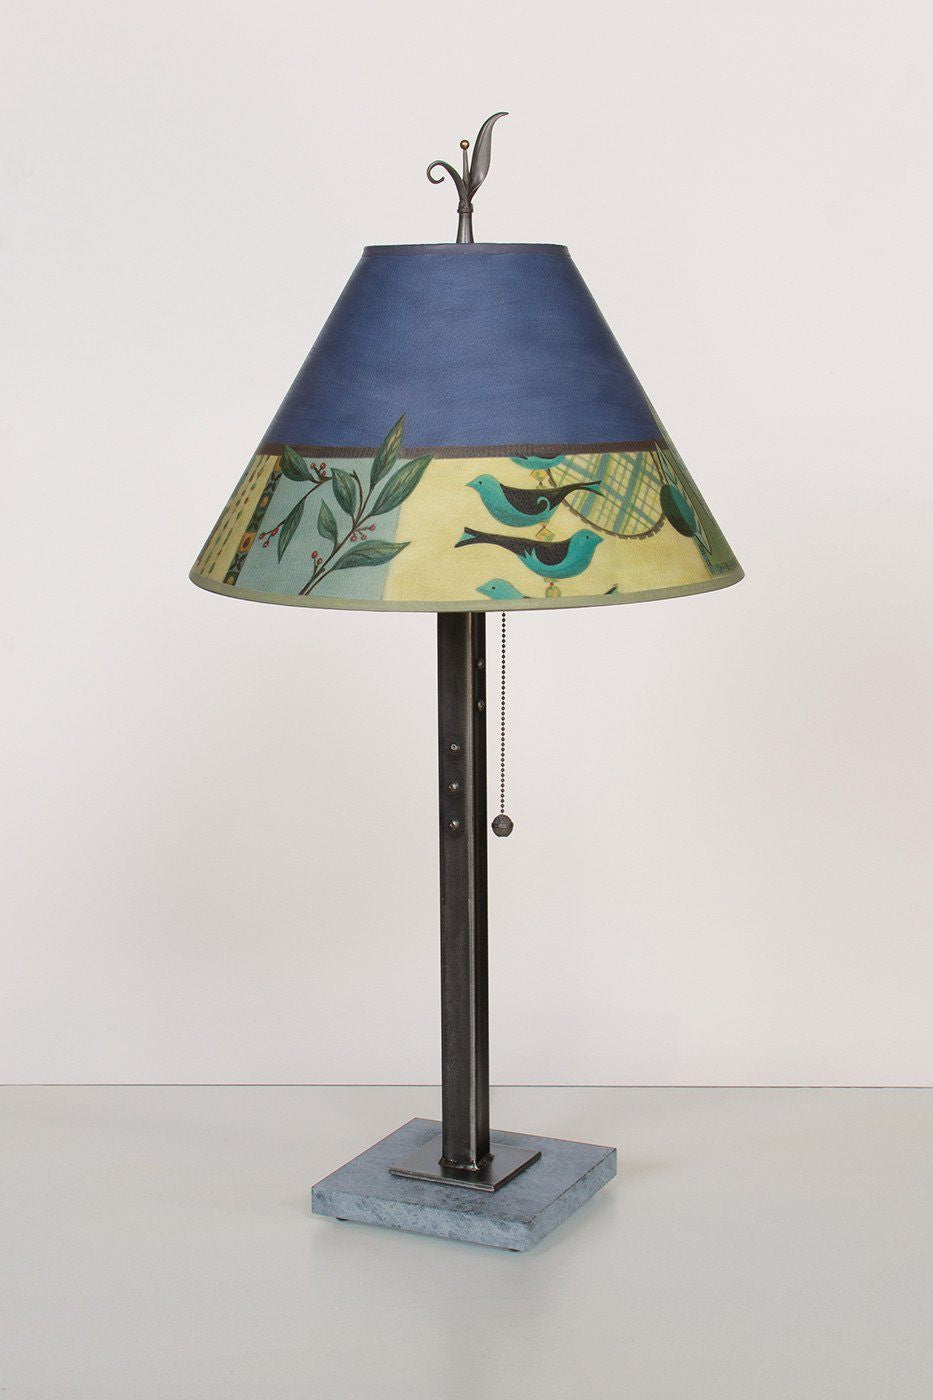 Steel Table Lamp on Marble with Medium Conical Shade in New Capri Periwinkle - Lit